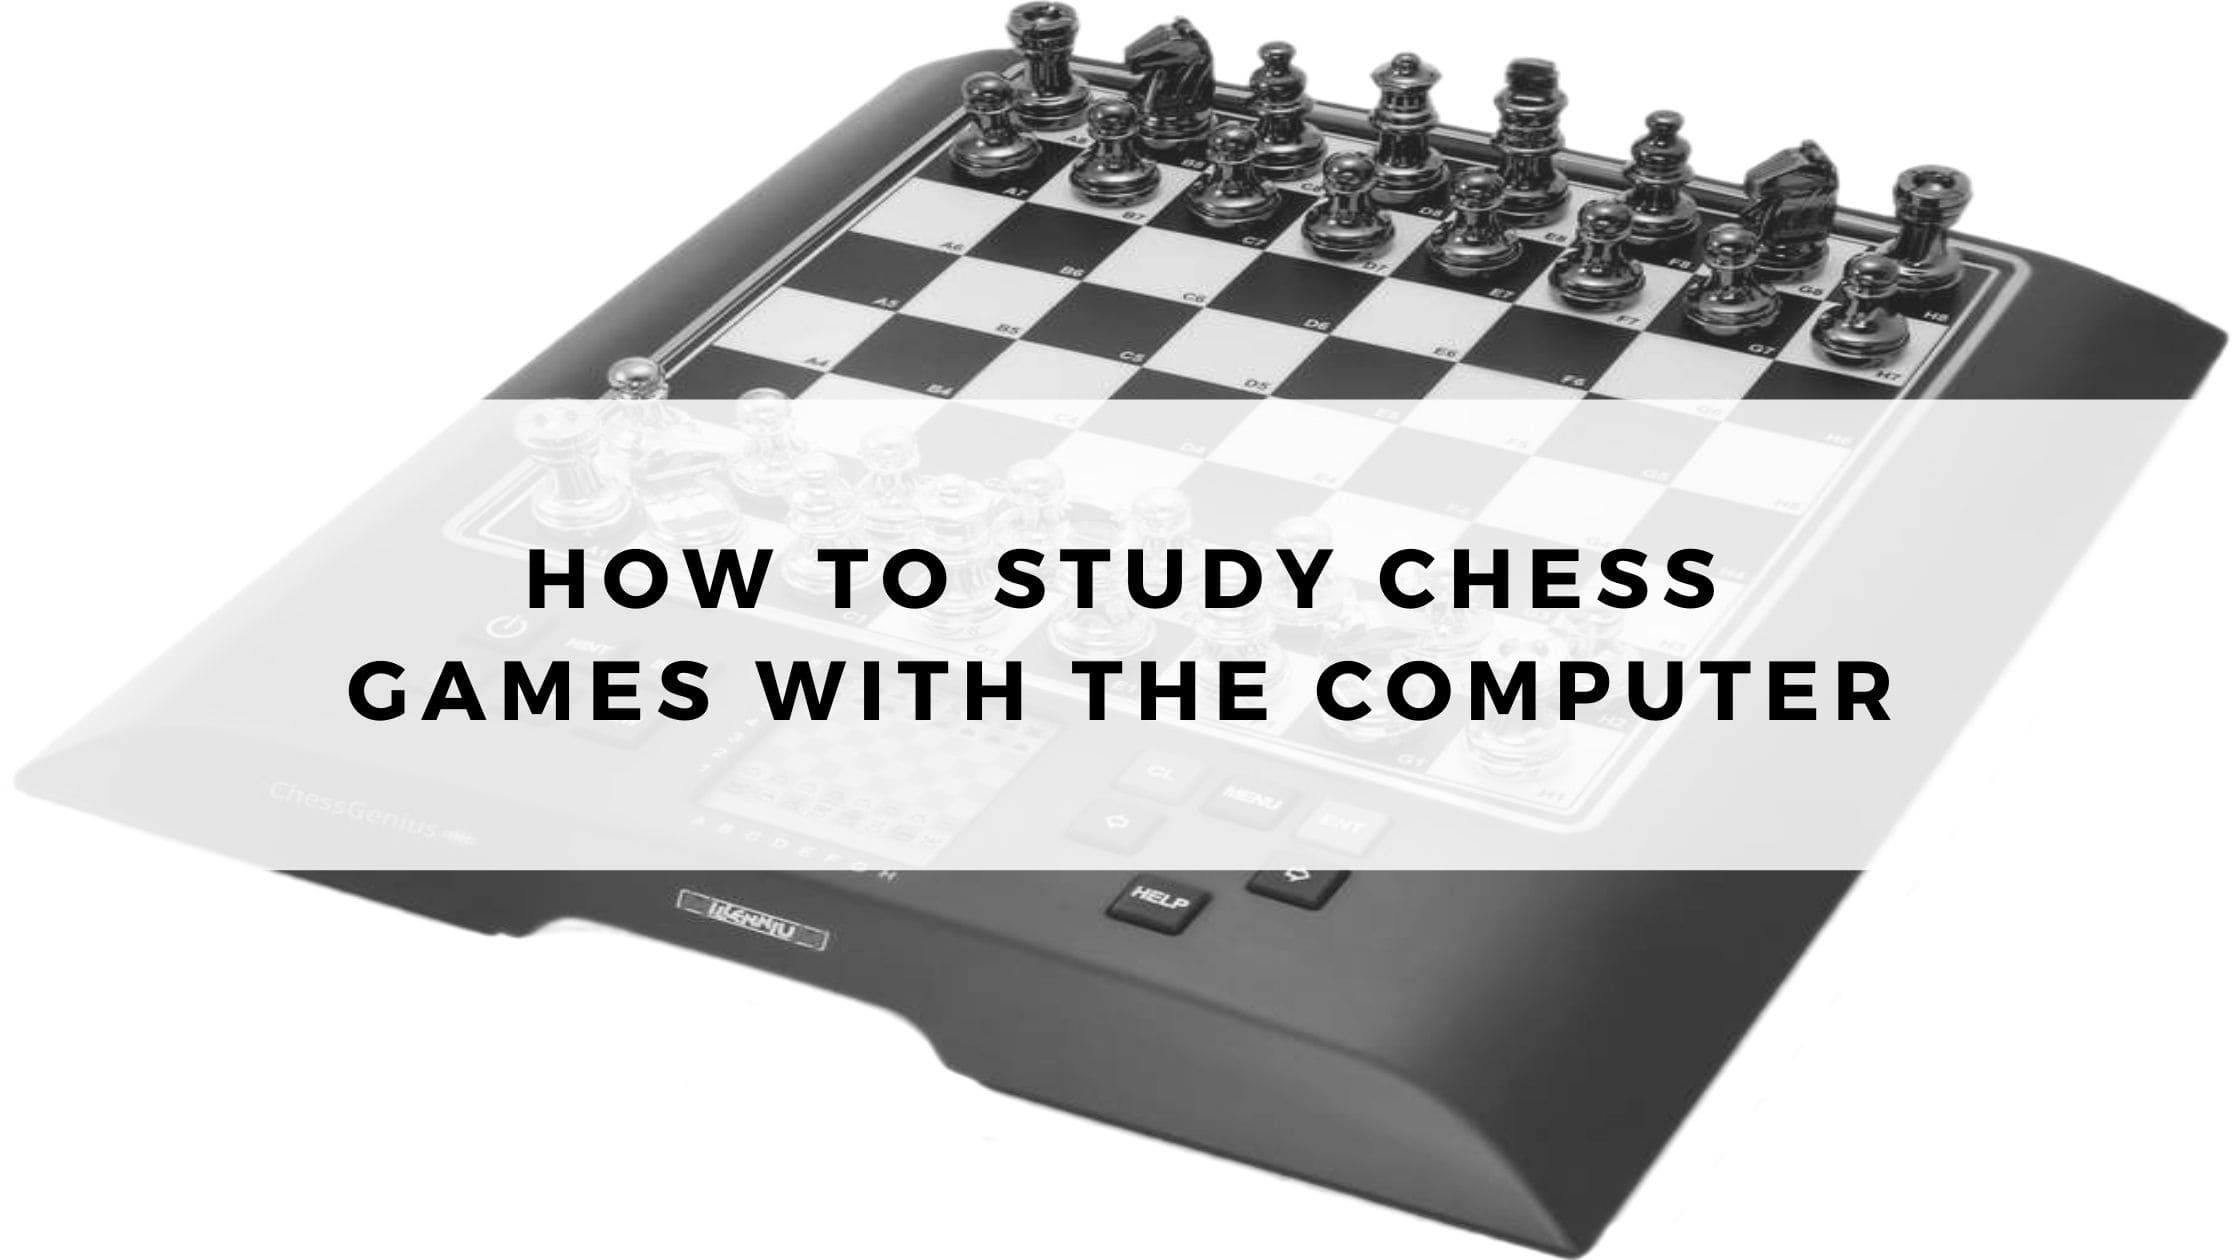 How to Study Chess Games with the Computer